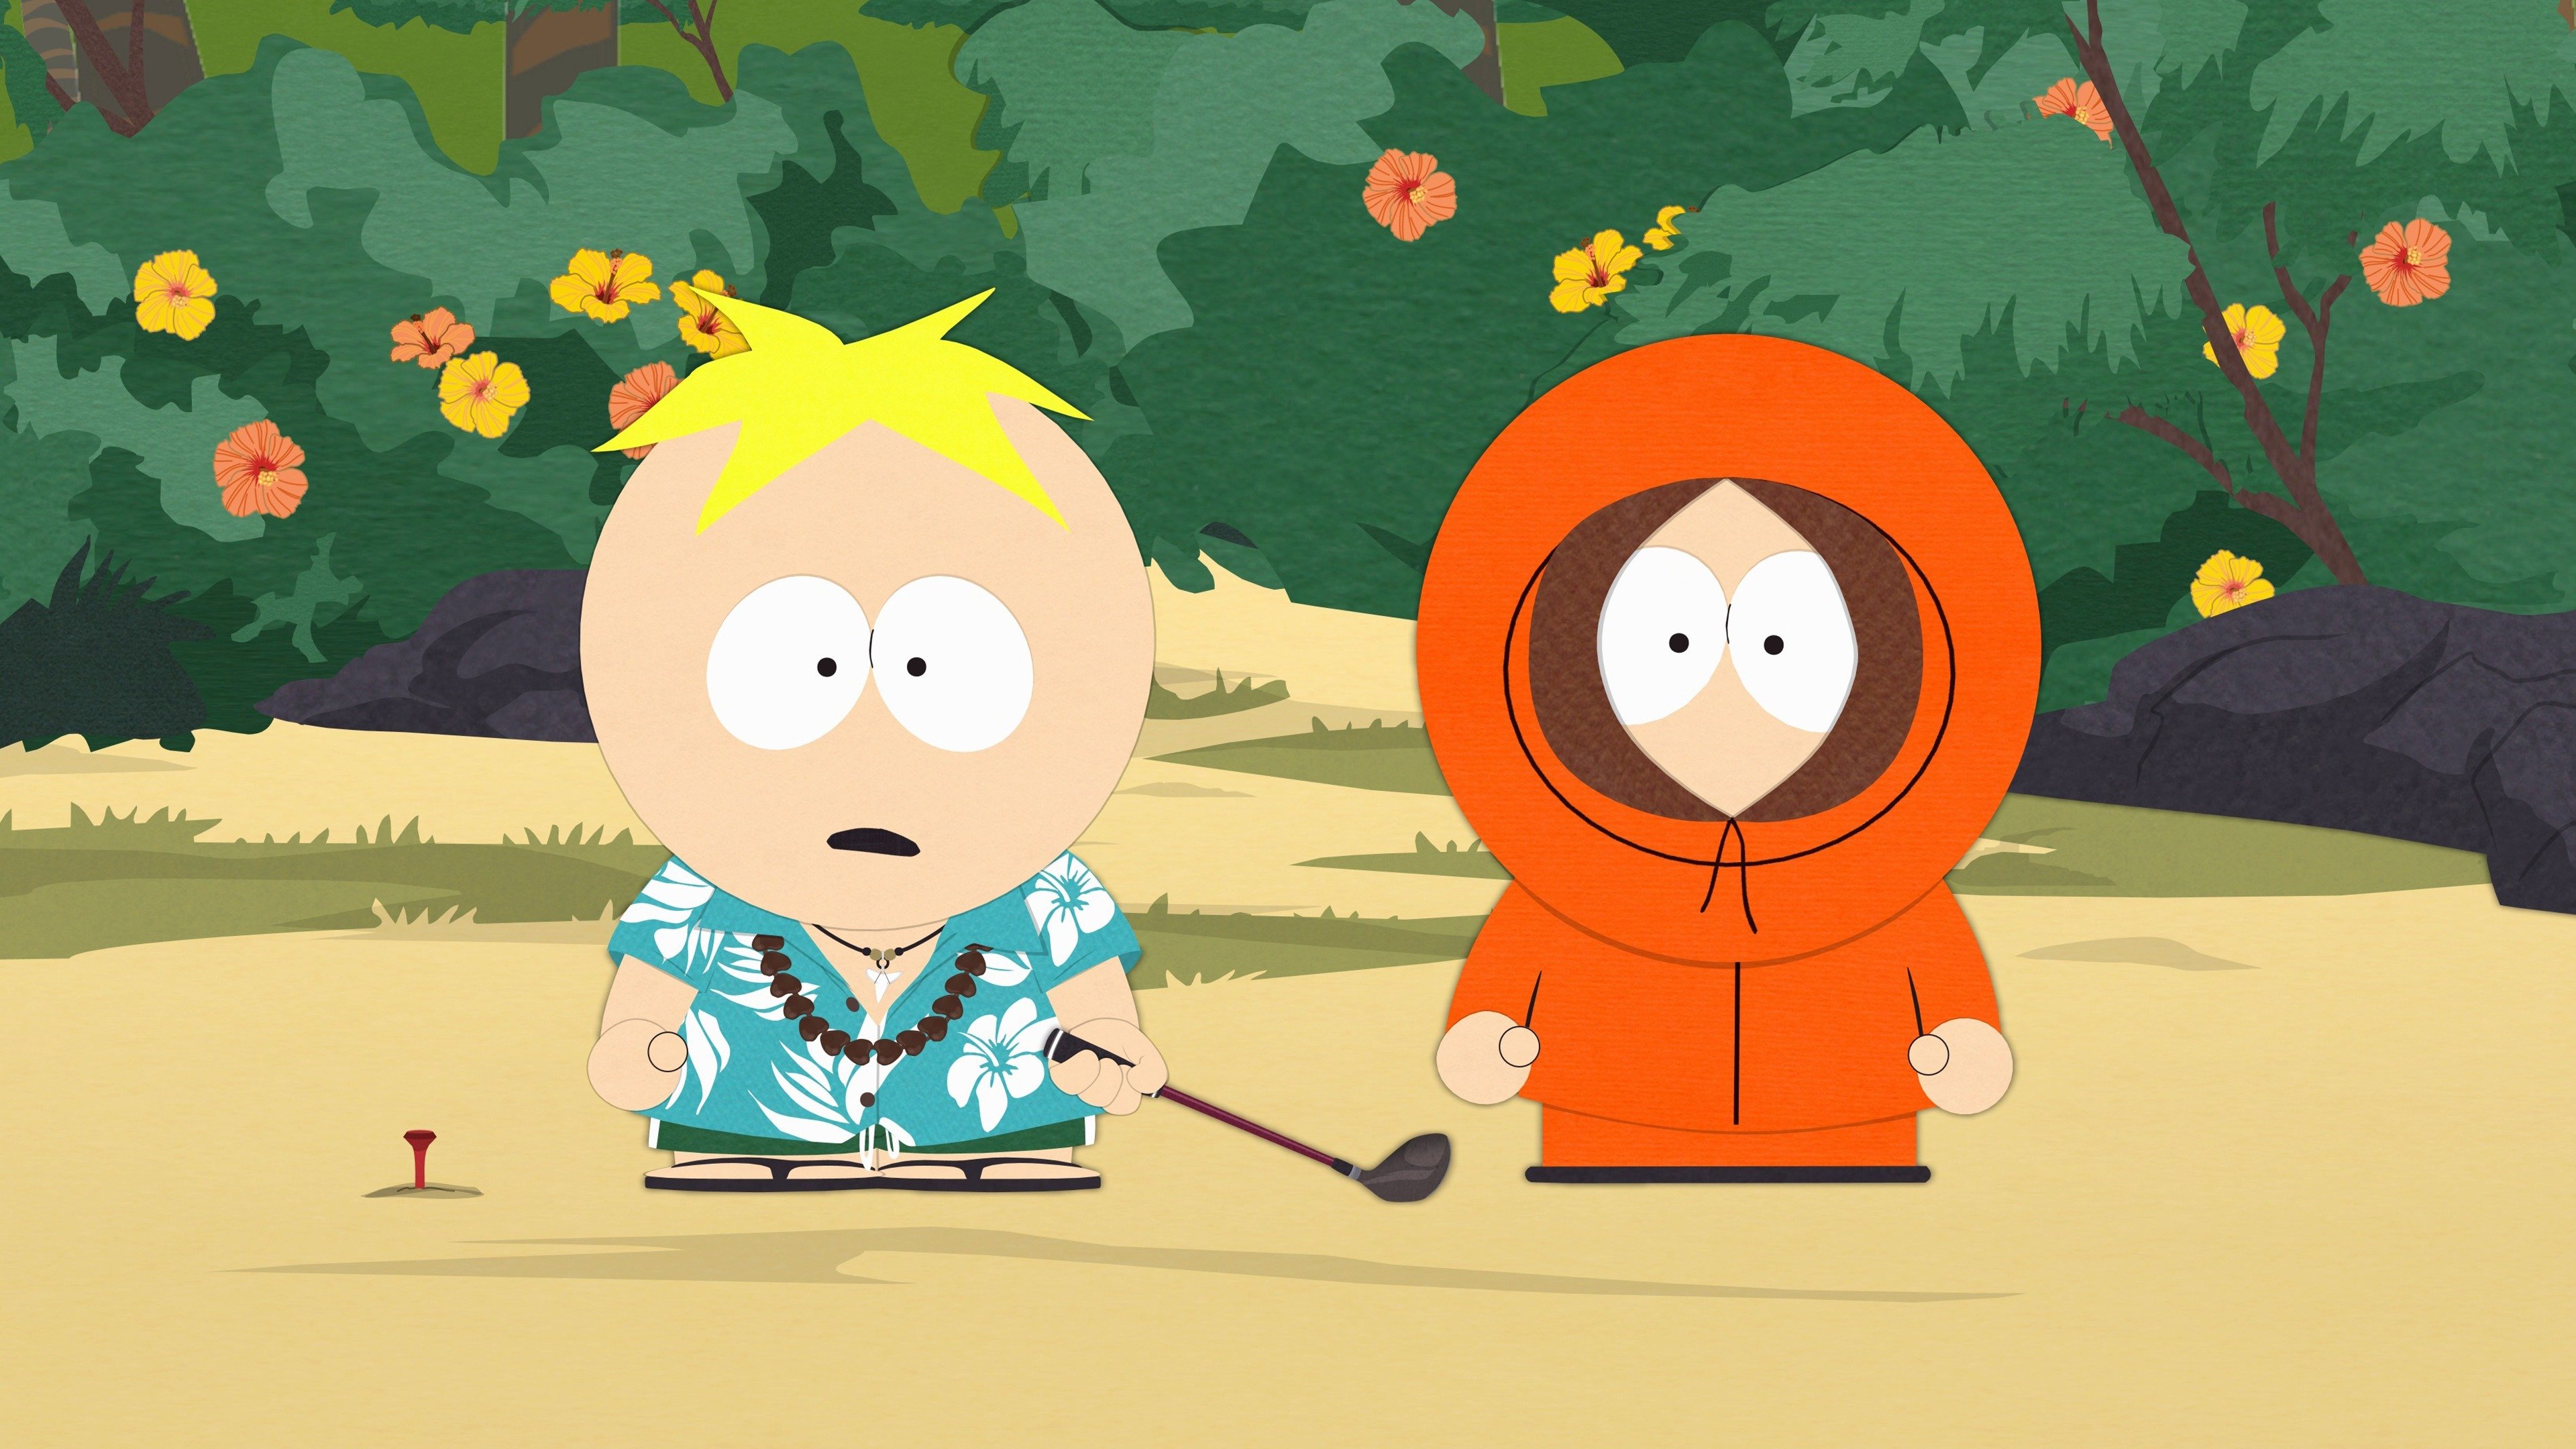 huh-za-t-to-it-south-park-2012-uklidit-e-n-k-vid-t